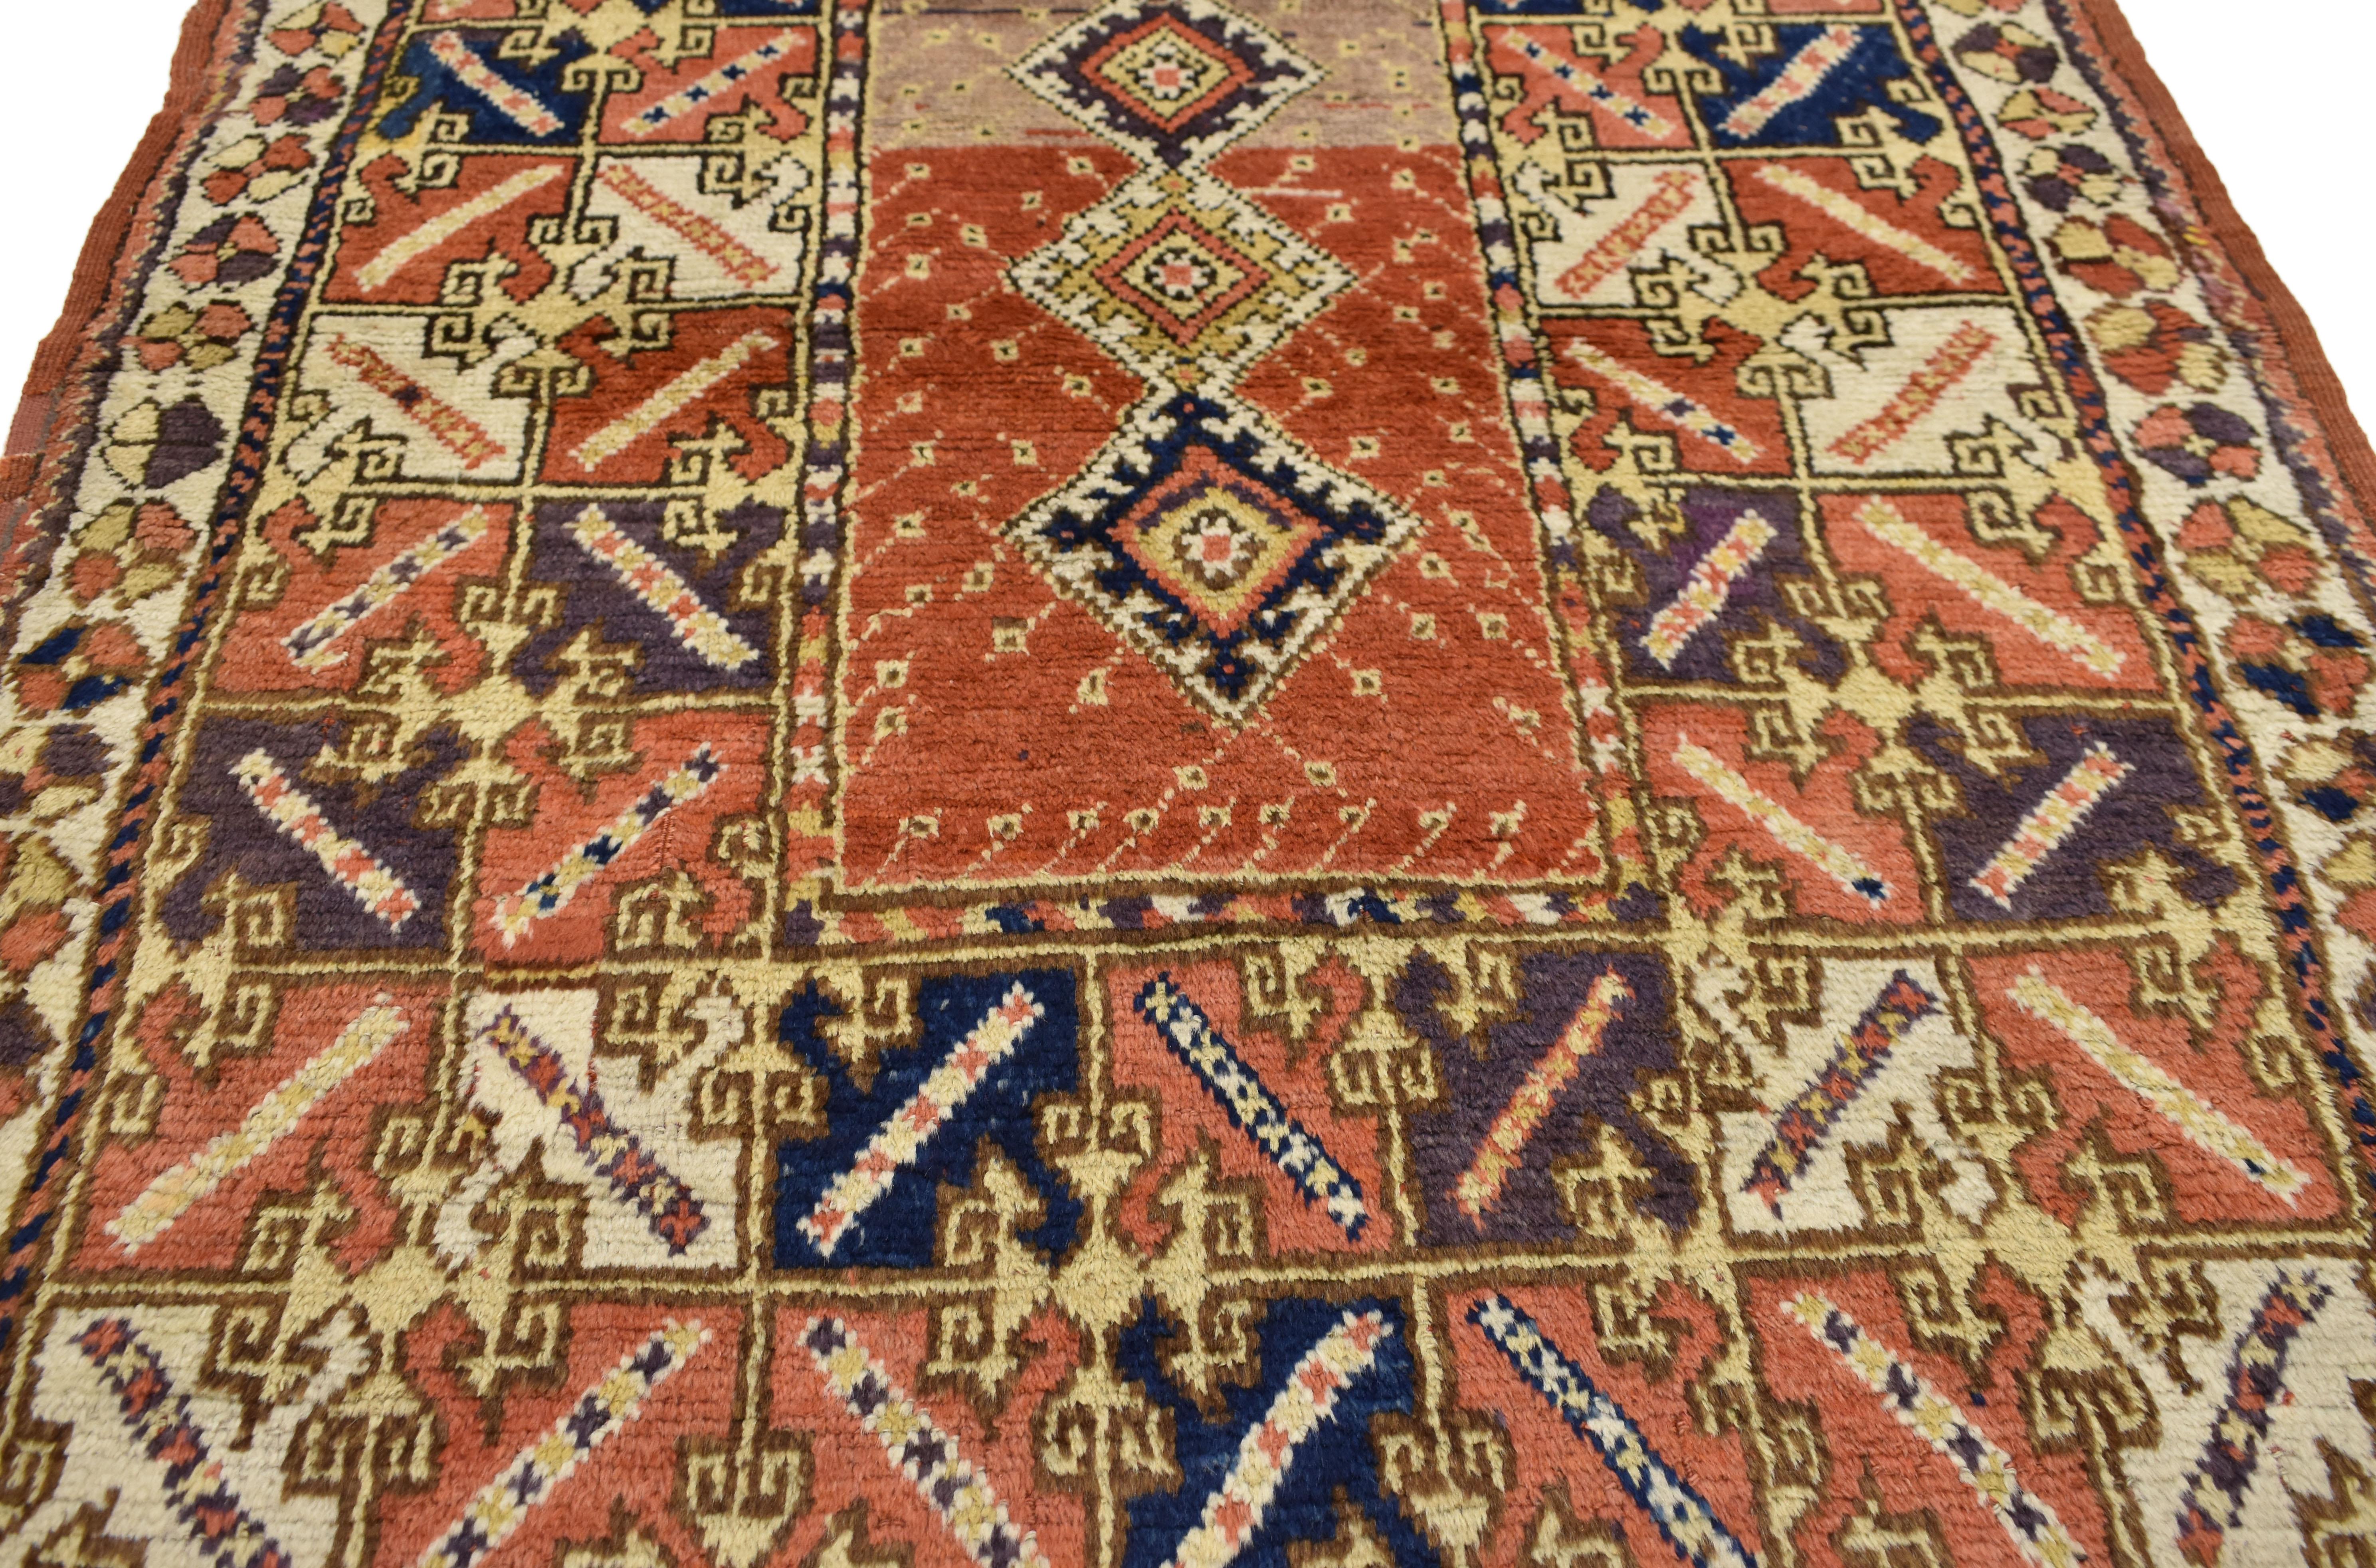 70739 Antique Turkish Accent Rug with Modern Tribal Style, Kitchen, Foyer or Entry Rug 04'00 x 06'00. This hand-knotted wool antique Turkish Oushak rug features a modern tribal style. Immersed in Anatolian history and vibrant colors, this vintage